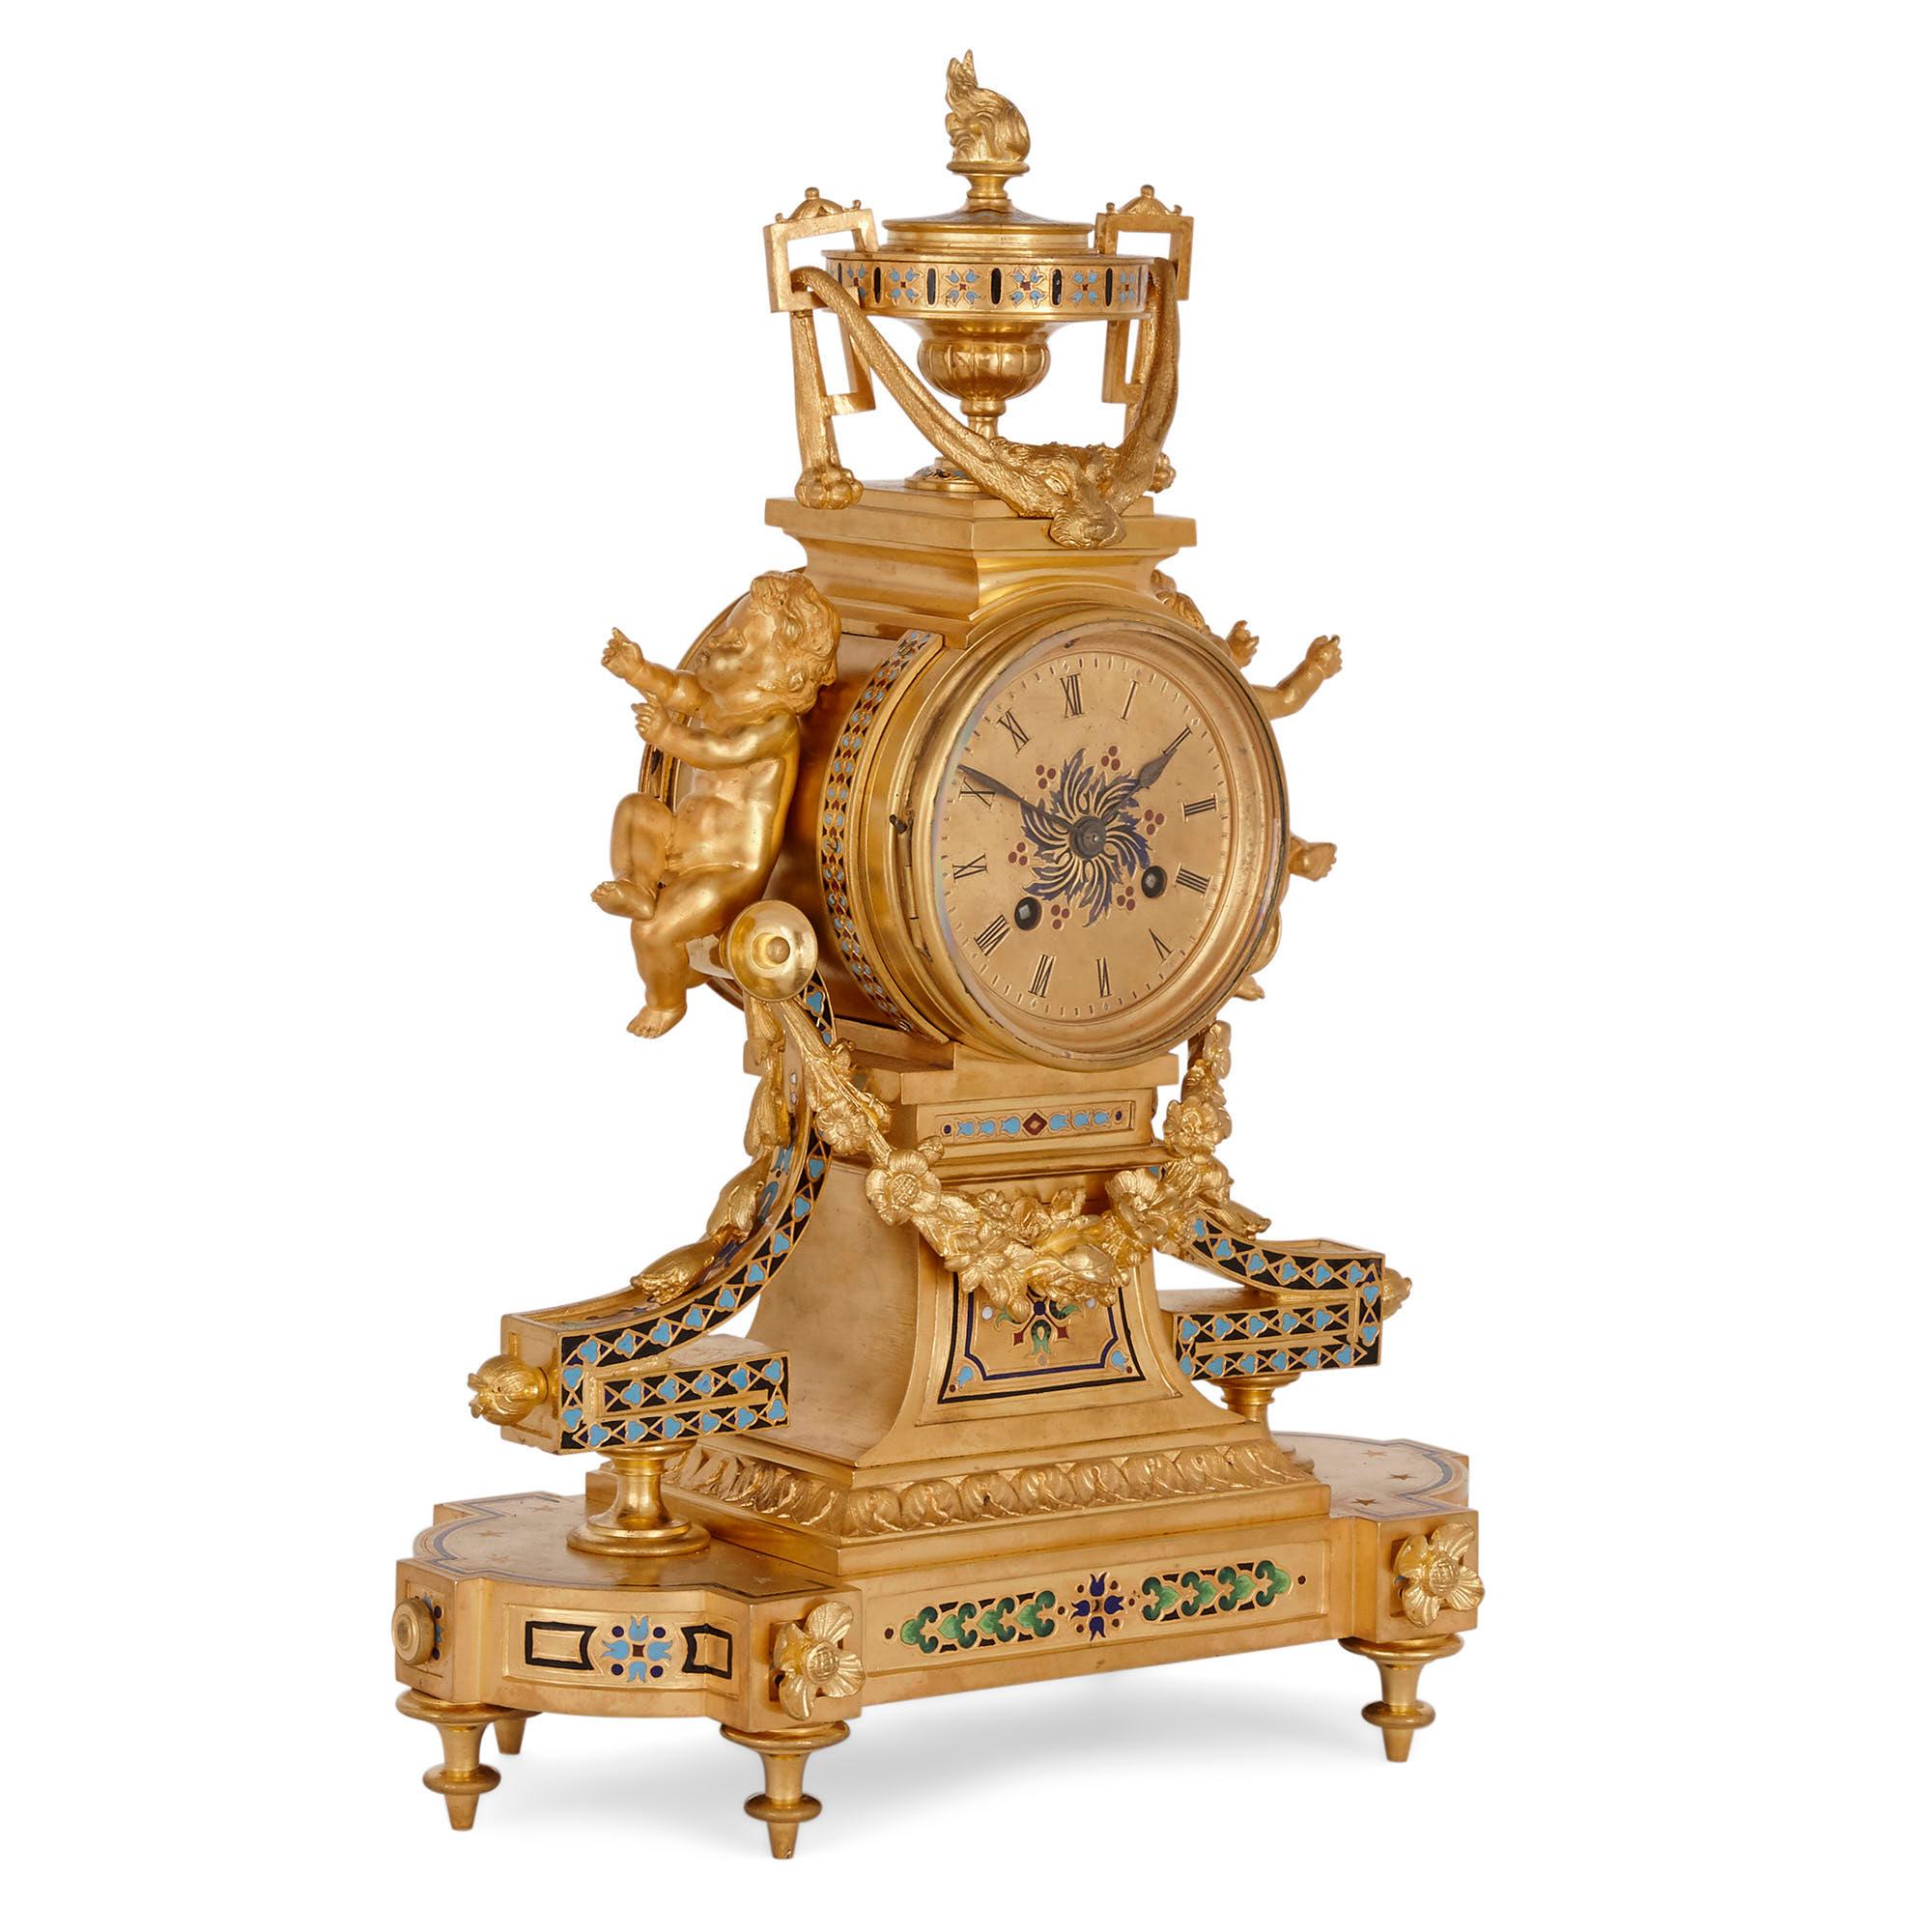 Antique French eclectic style enamel and gilt bronze clock set
French, late 19th century
Measures: Clock: Height 41cm, width 30cm, depth 15cm
Candelabra: Height 36cm, width 17cm, depth 17cm

This gilt bronze and enamel garniture contains a